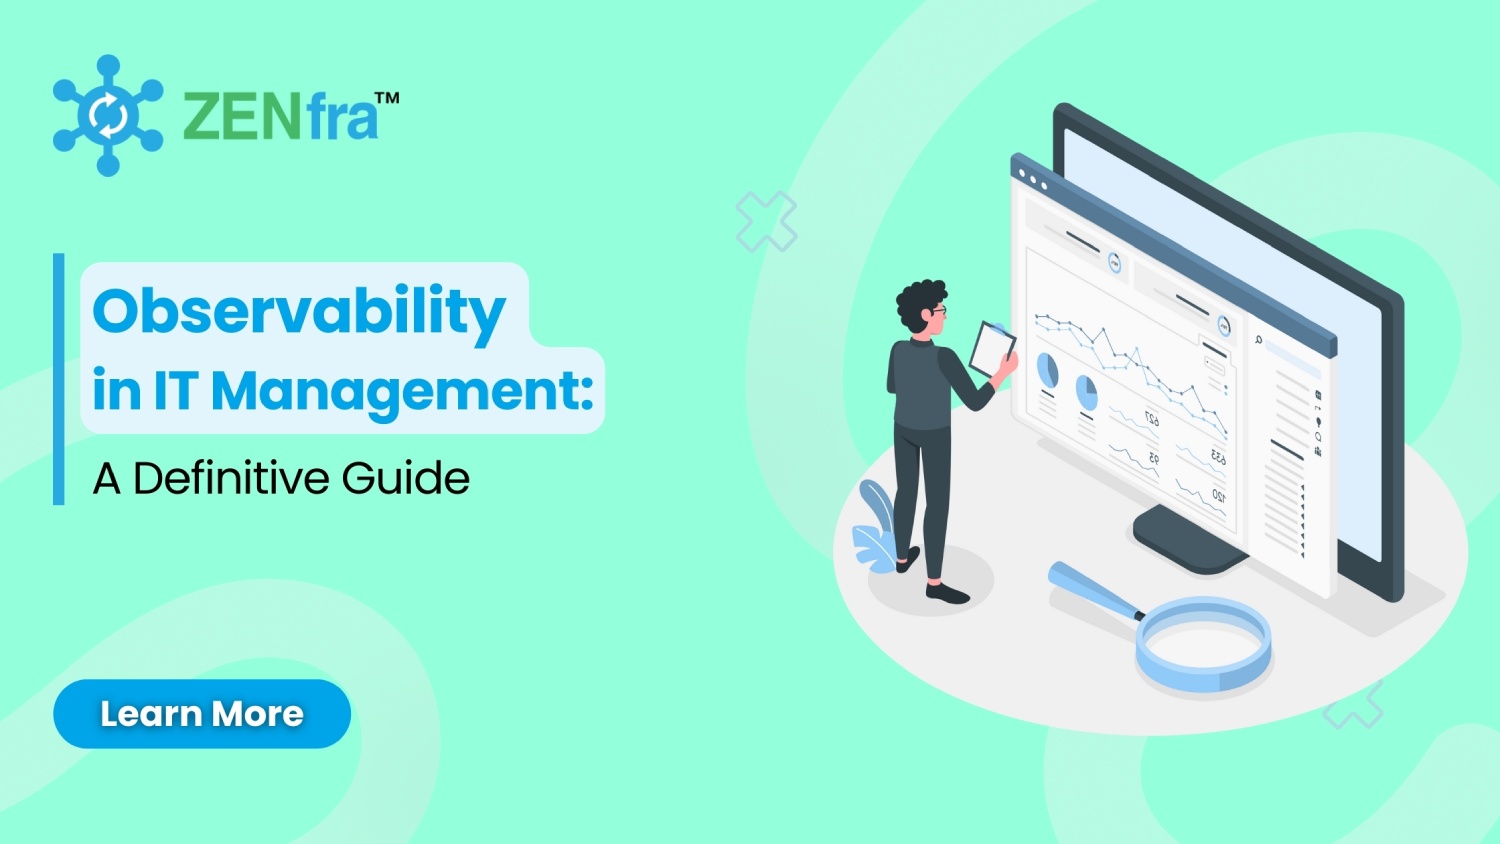 The Definitive Guide to Observability in IT Management